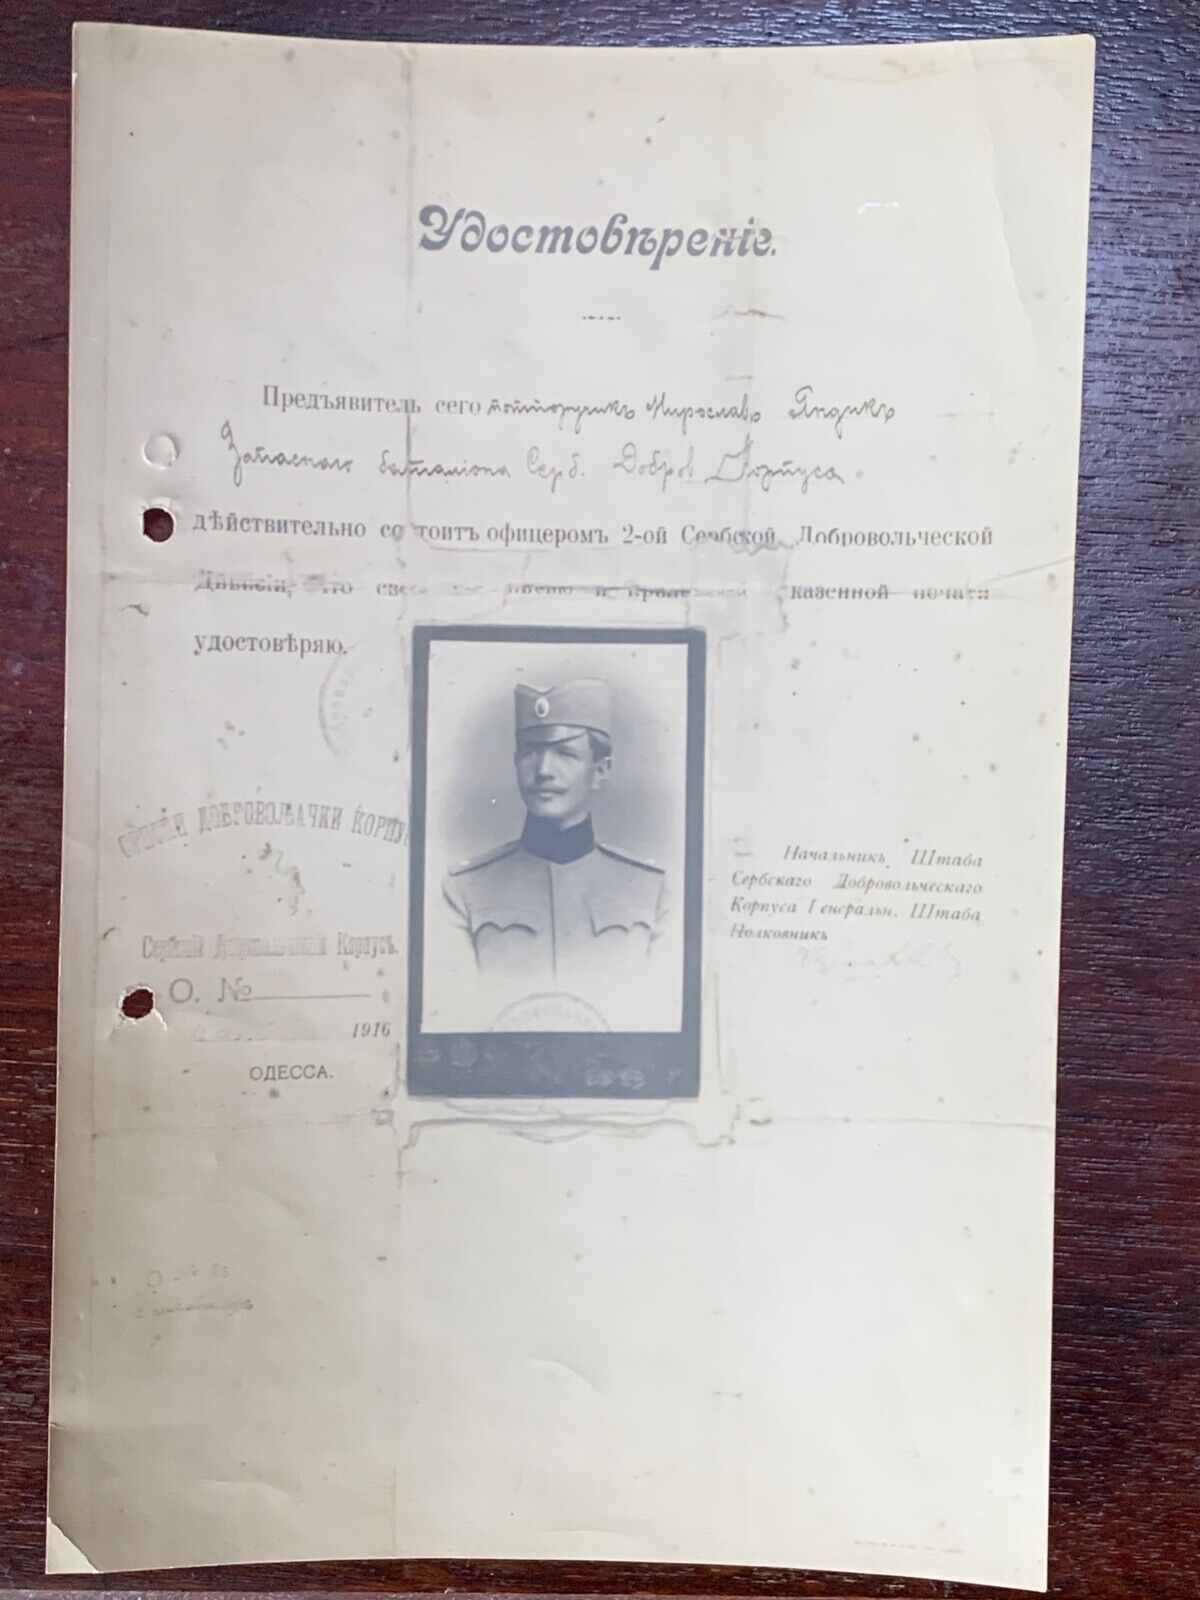 WWI in Russian Odessa/Identity Card of Serbian Officer/ORIGINAL PHOTOGRAPH 1916